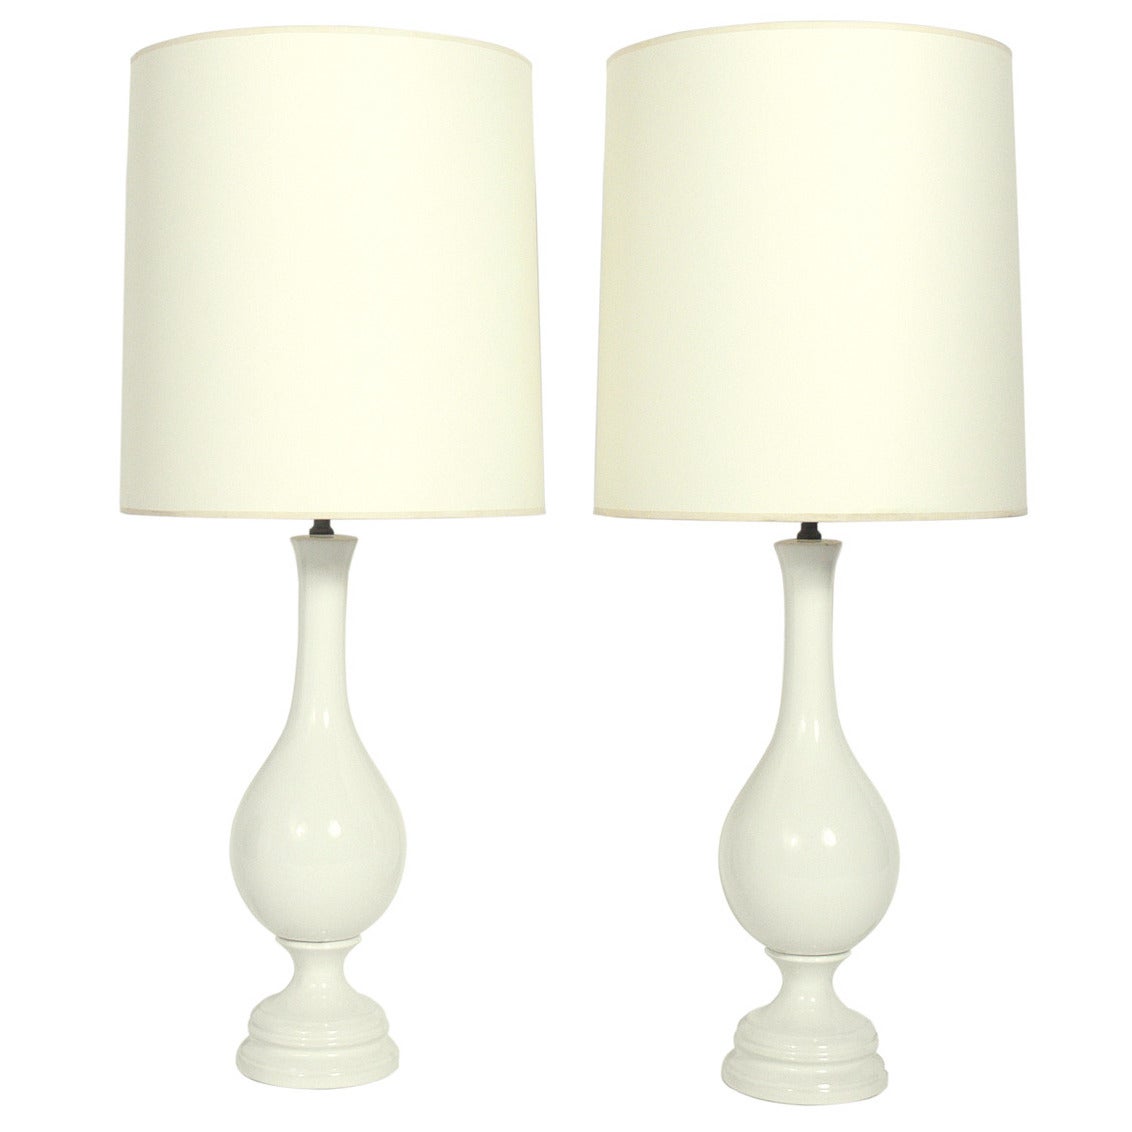 Pair of Tall White Ceramic Lamps